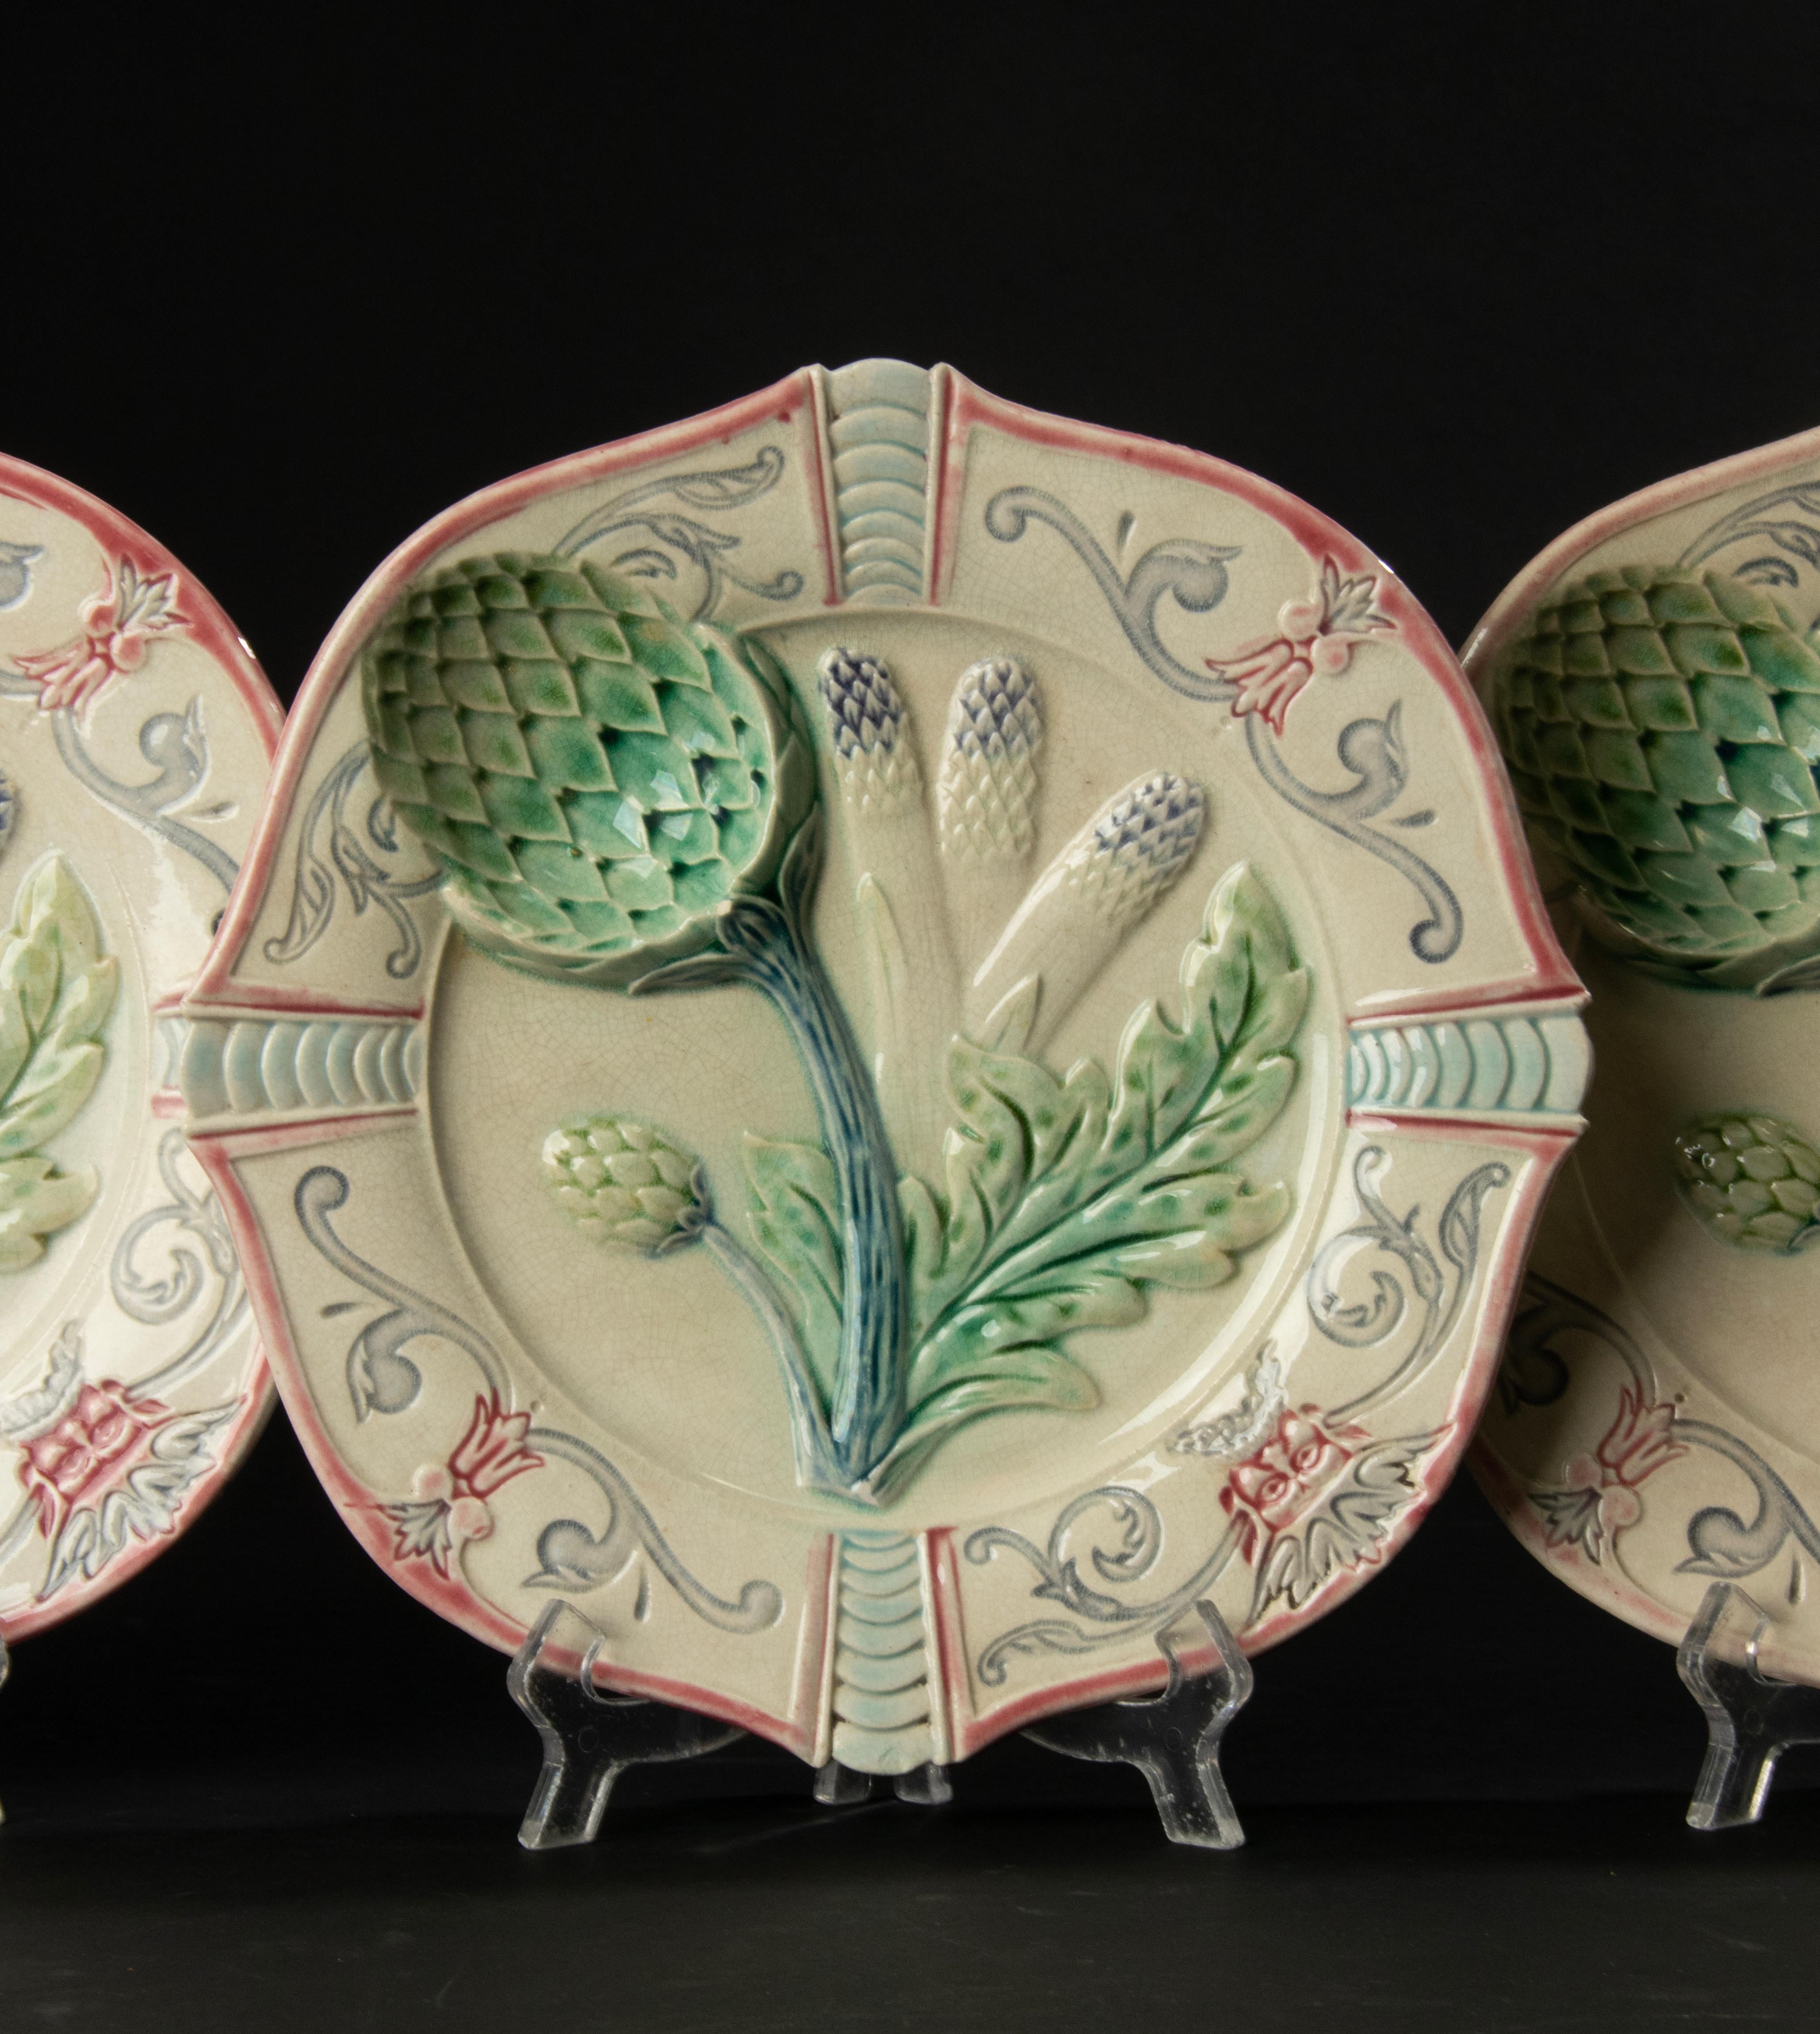 3-Piece Set of 19th Century Majolica Artichoke Plates In Good Condition For Sale In Casteren, Noord-Brabant